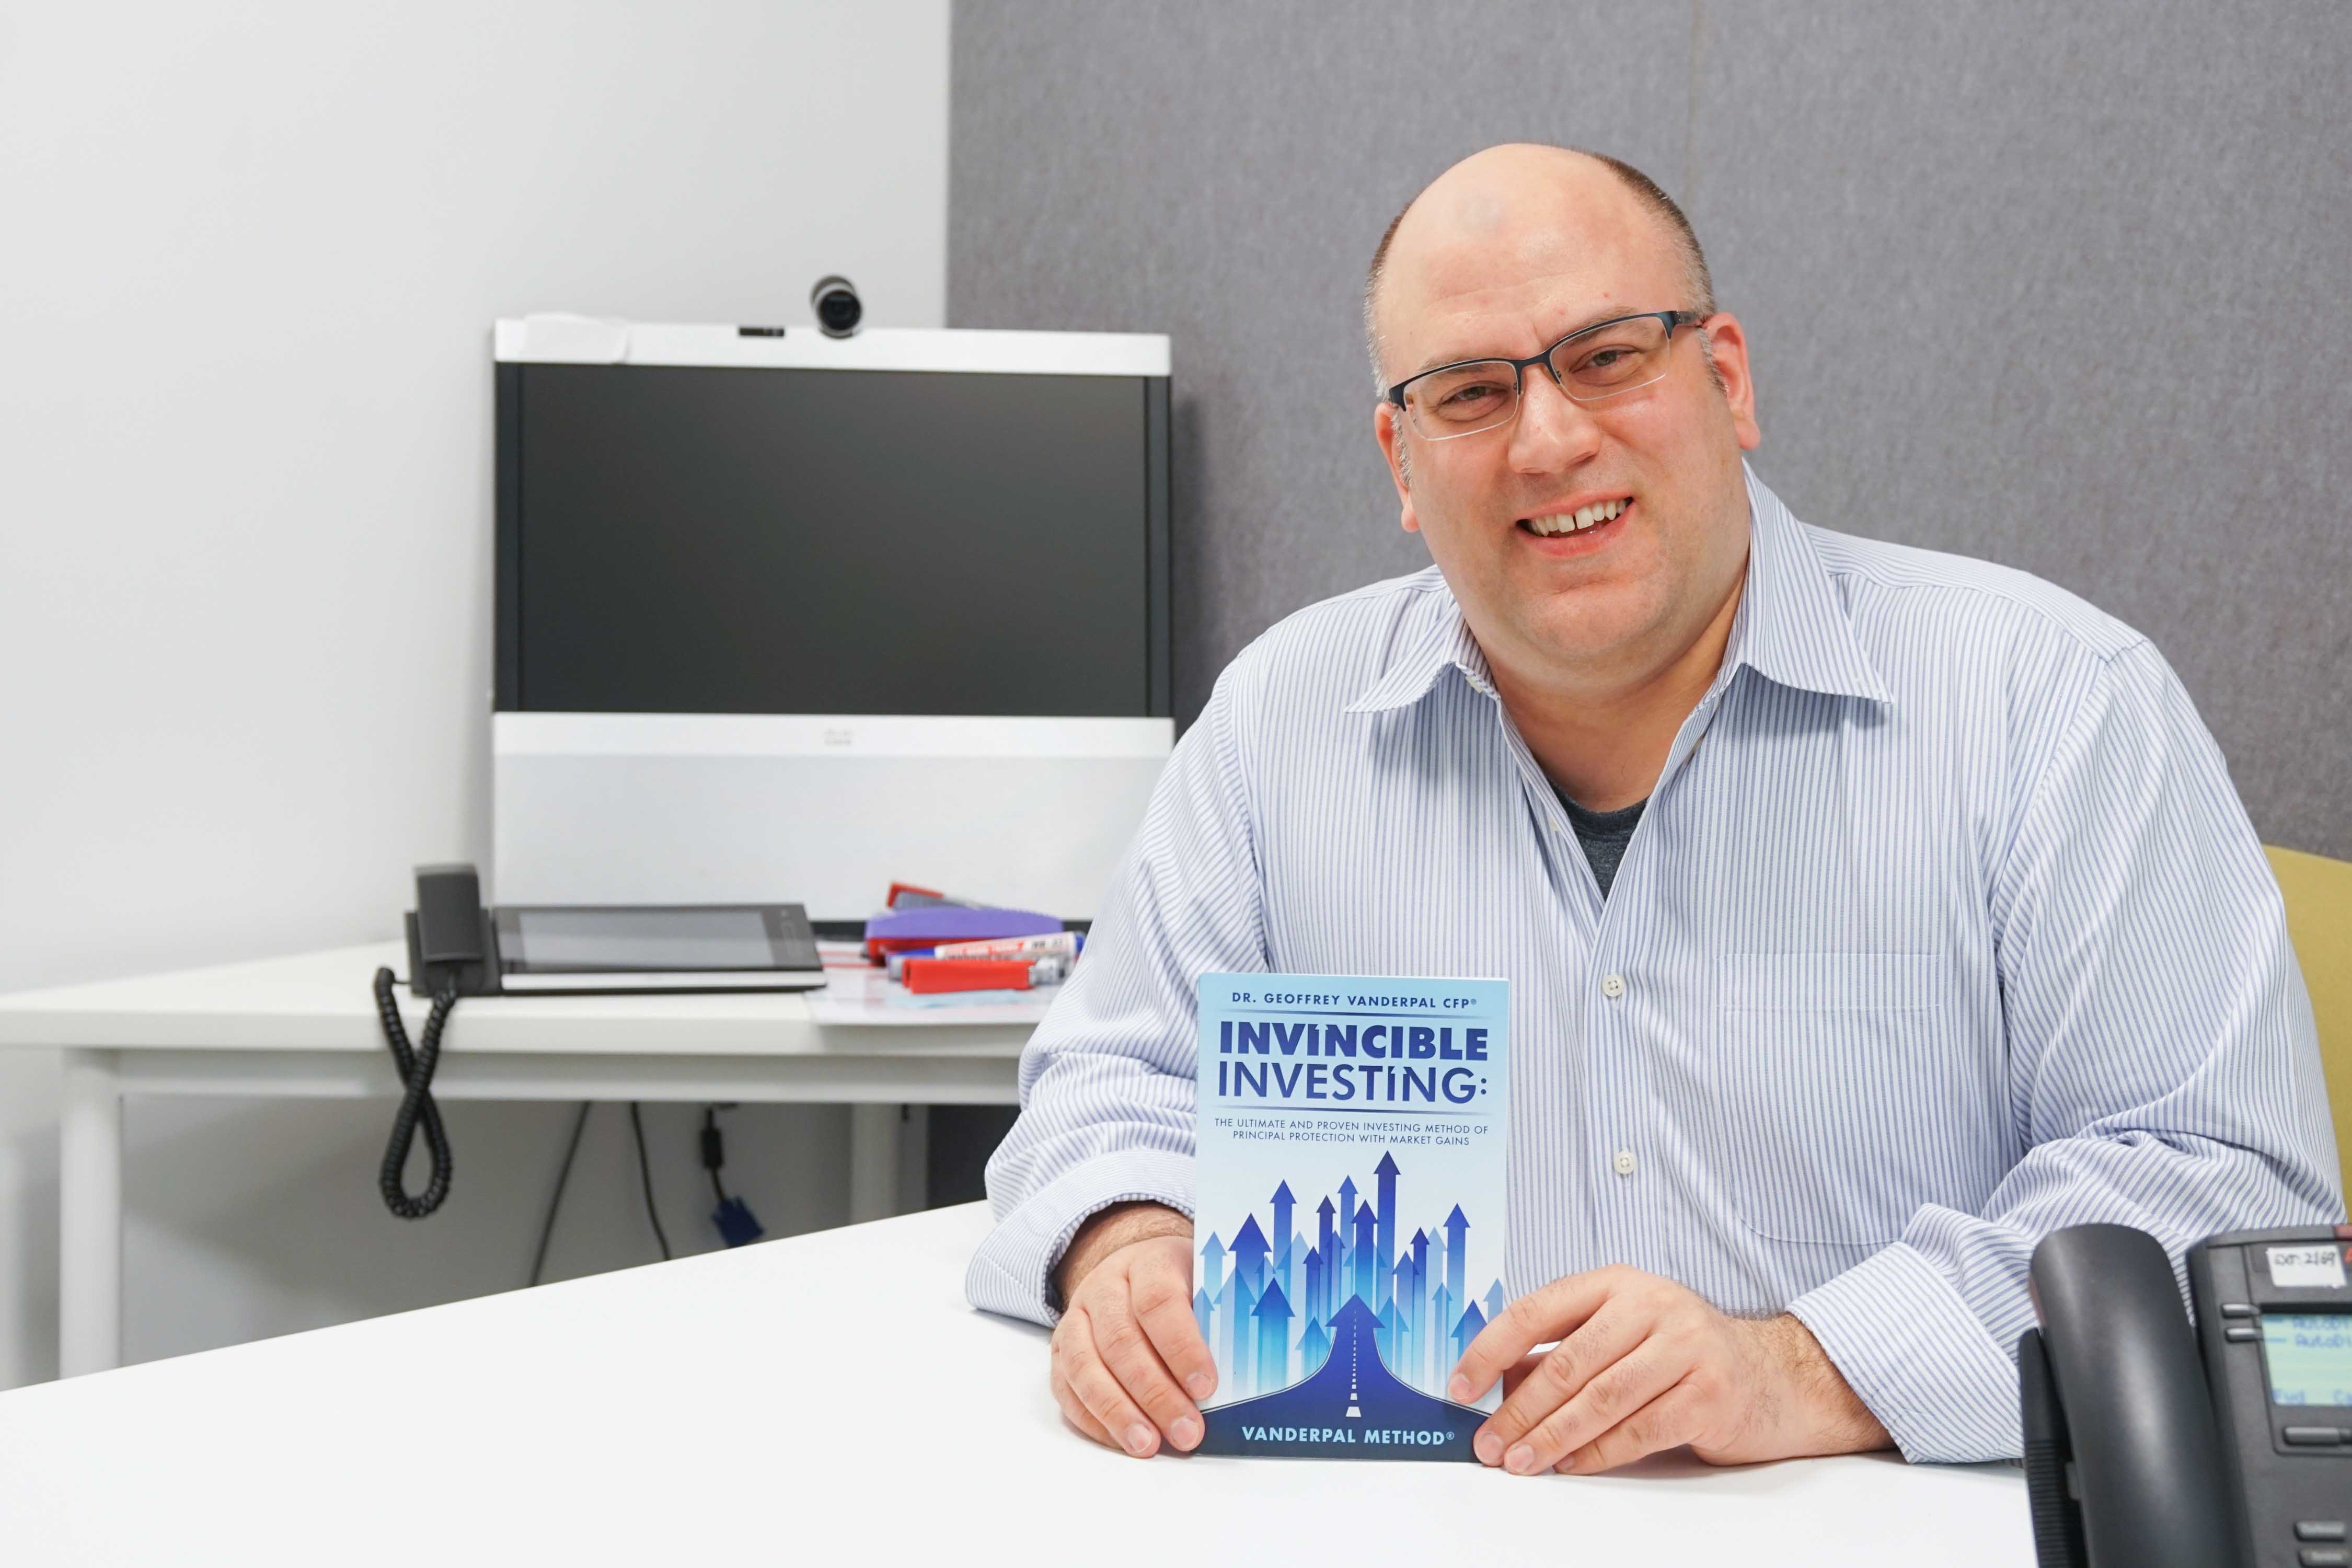 Executive MBA Program Manager Dr Geoffrey VanderPal presented his newly-published book on investing.